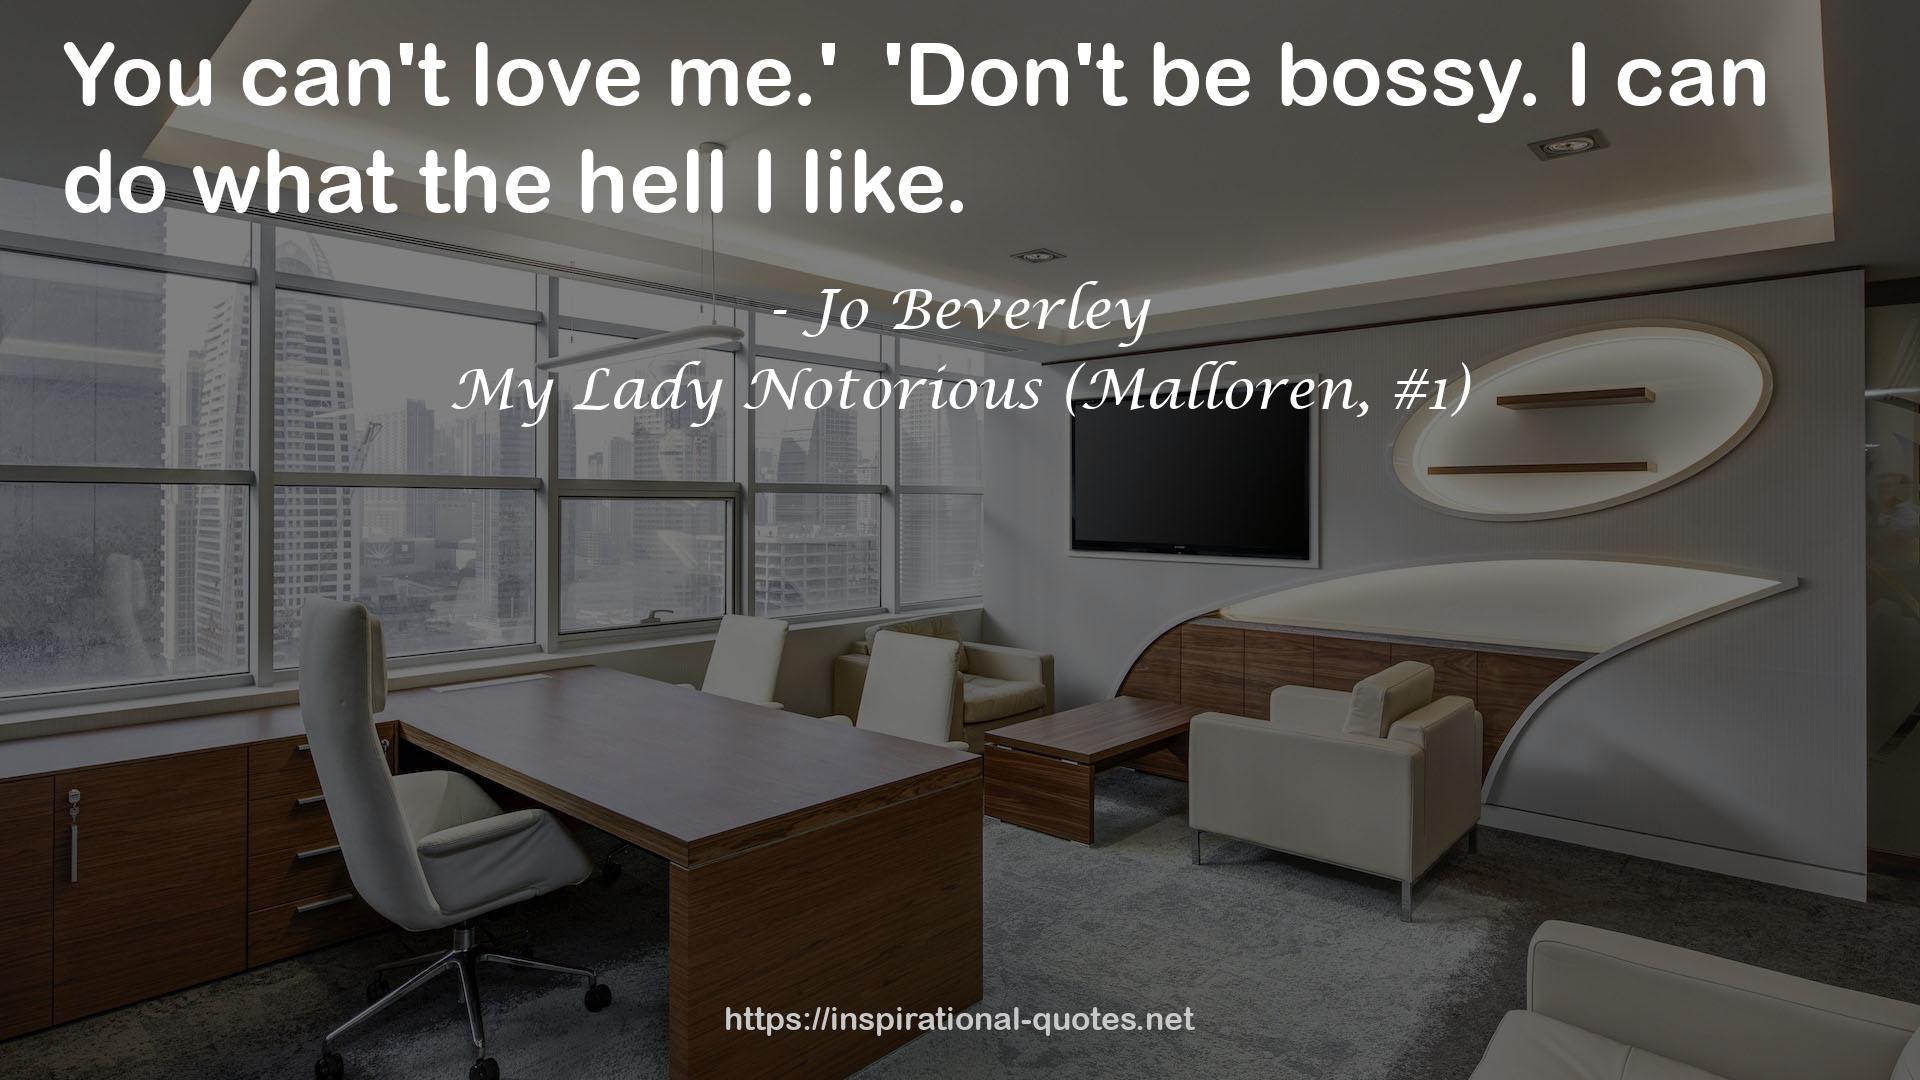 My Lady Notorious (Malloren, #1) QUOTES